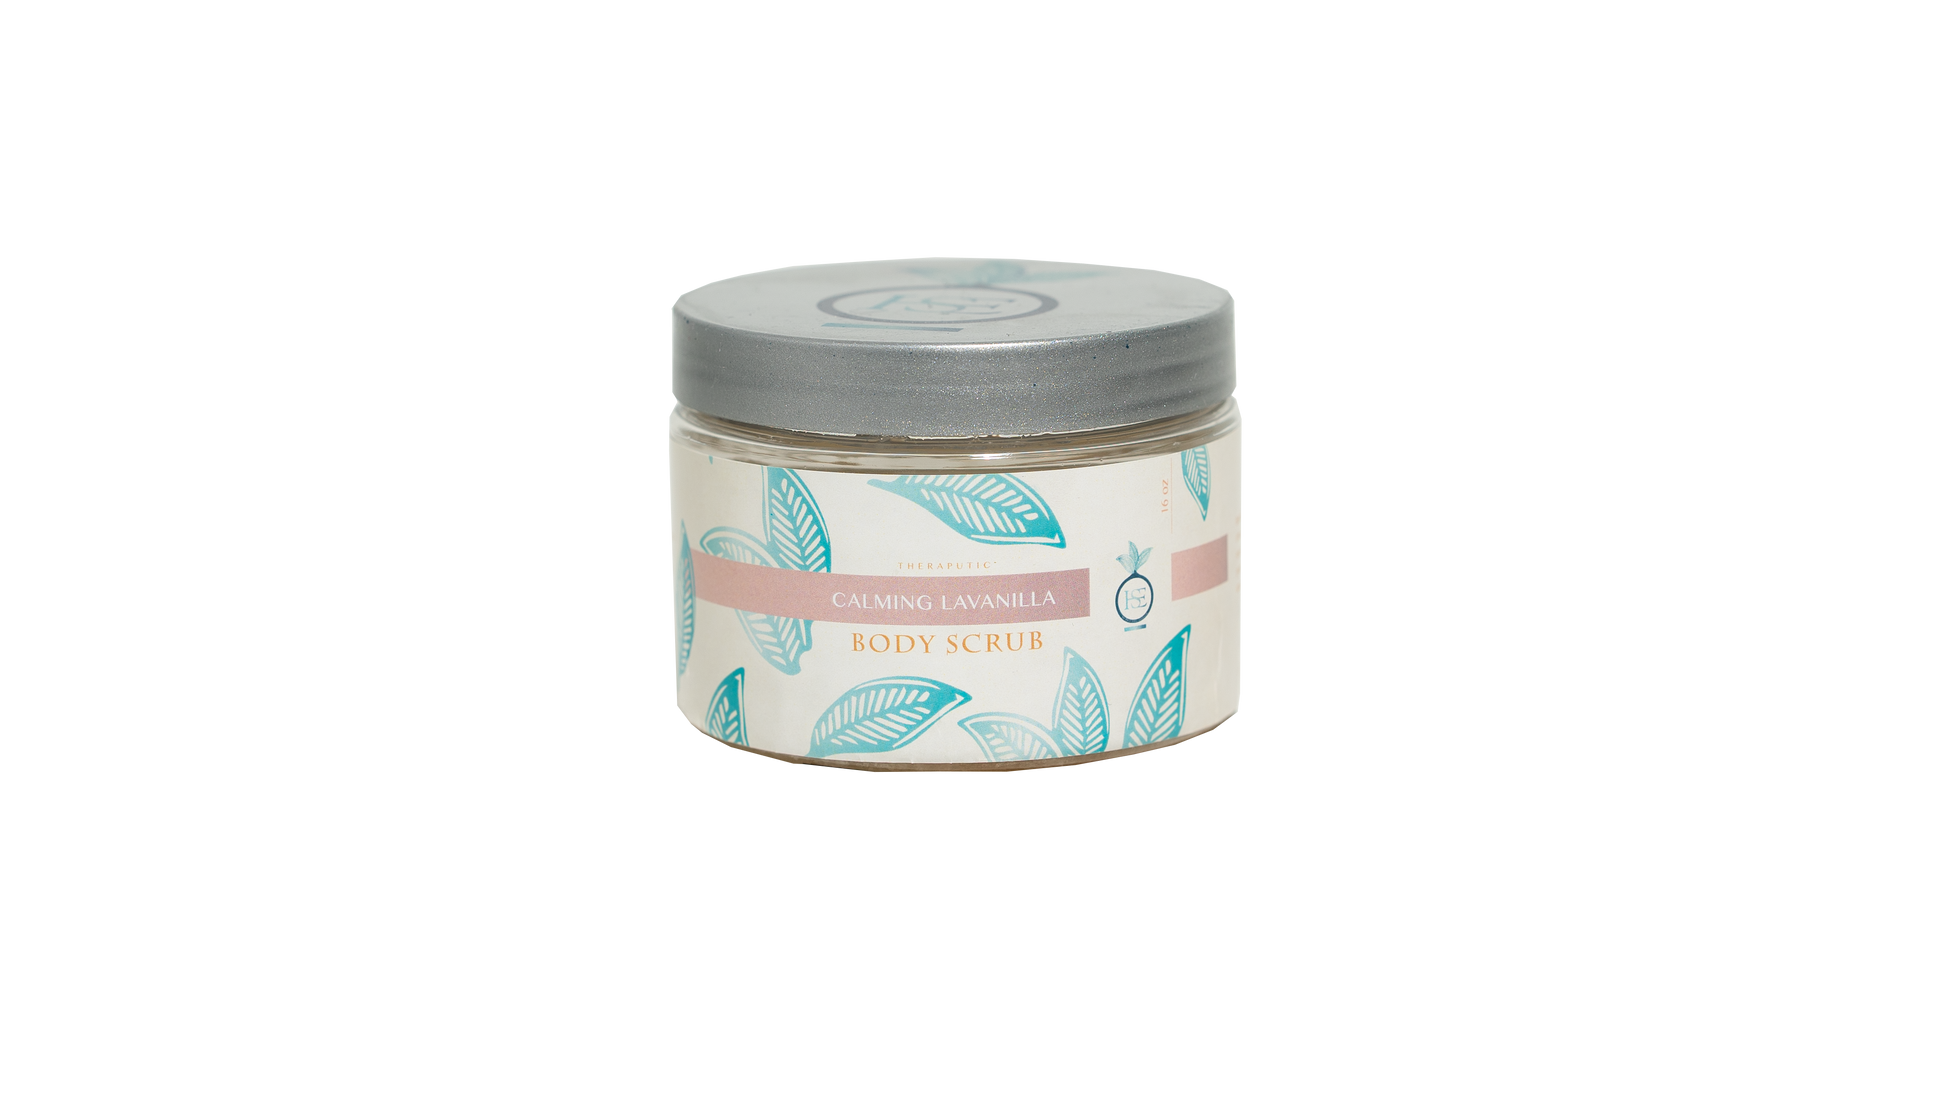 A closed 16 oz. jar of Calming LaVanilla body scrub is showcased against a transparent background, highlighting its clean and inviting packaging.